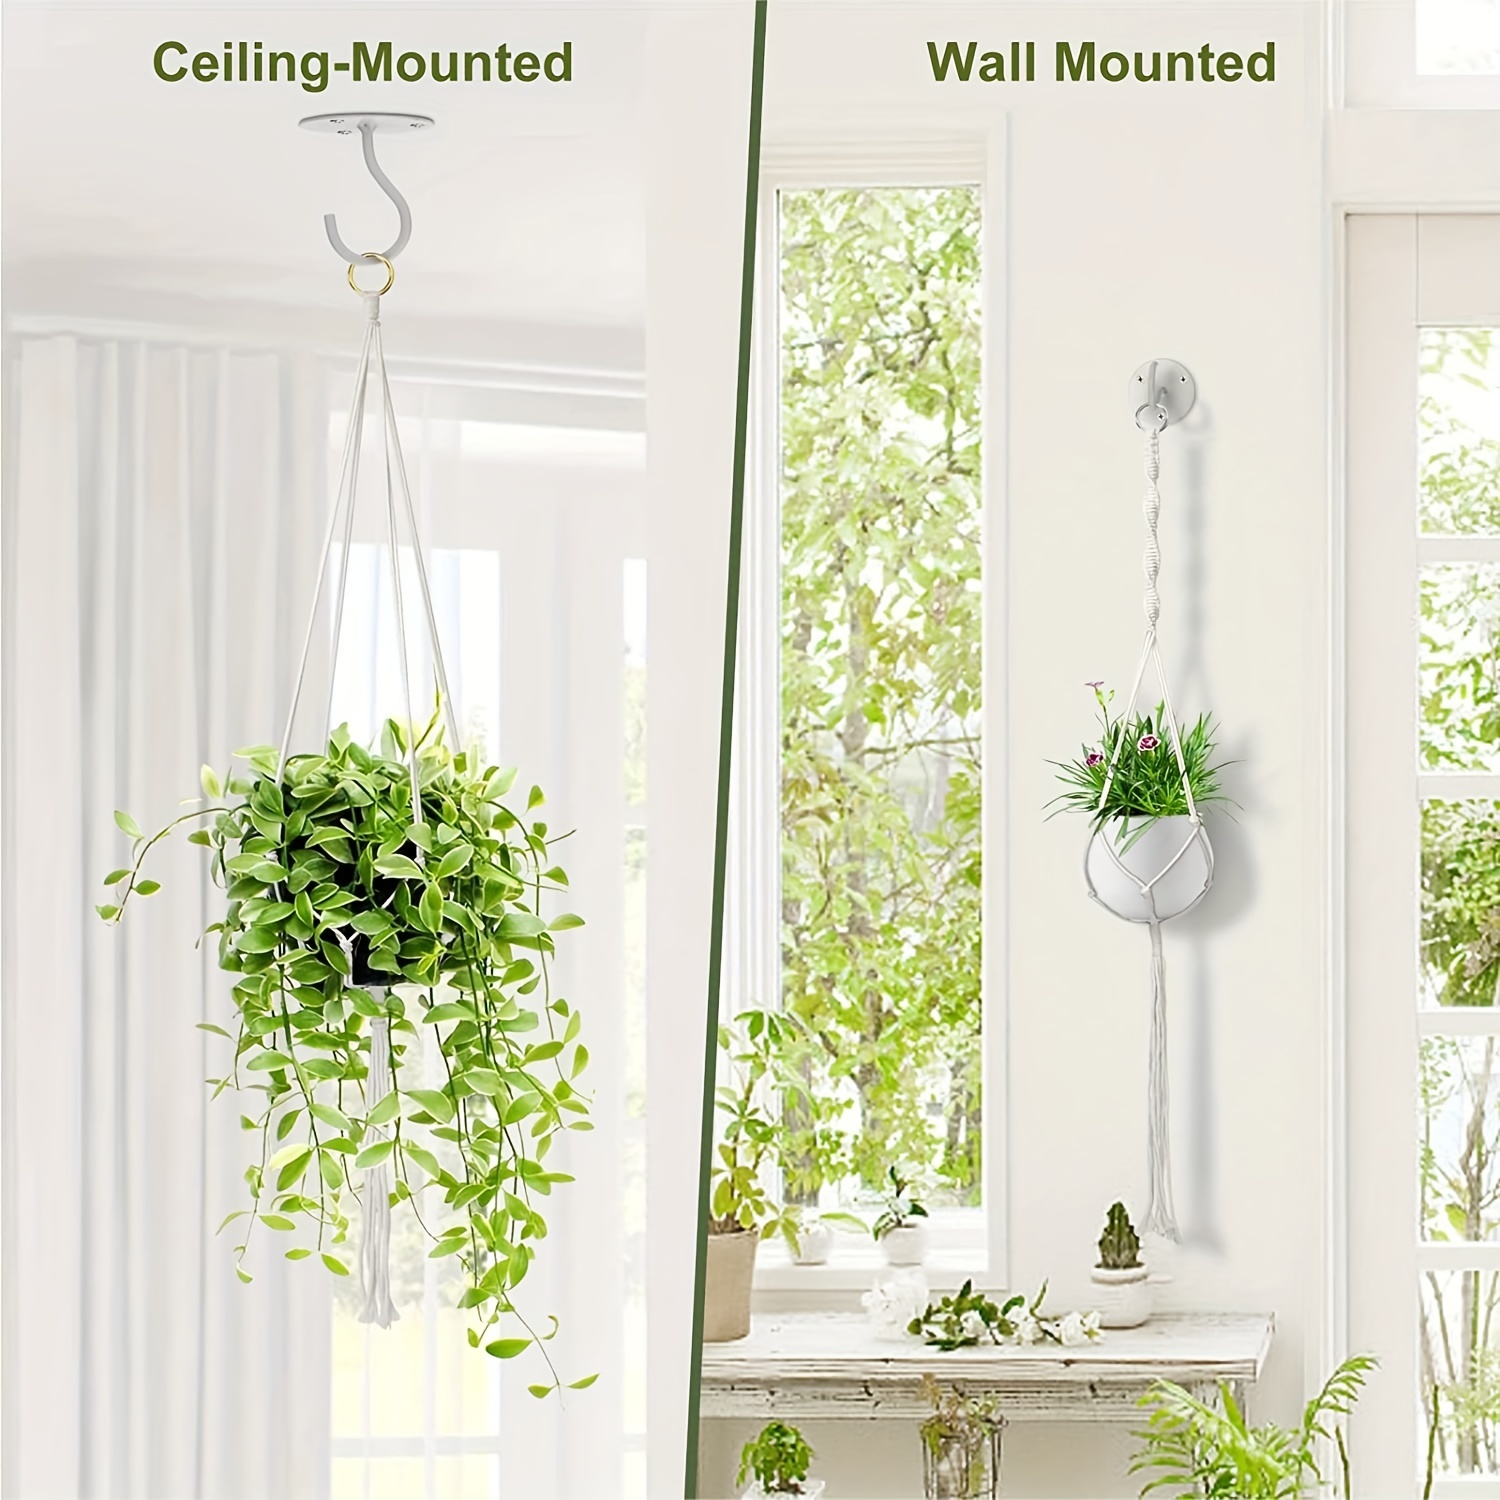 4 Packs Ceiling Hooks For Hanging Plants, Heavy Duty Metal Wall Mounted  Plant Hooks, Wall Hooks For Hanging Bird Feeders, Lanterns, Wind Chimes,  Light